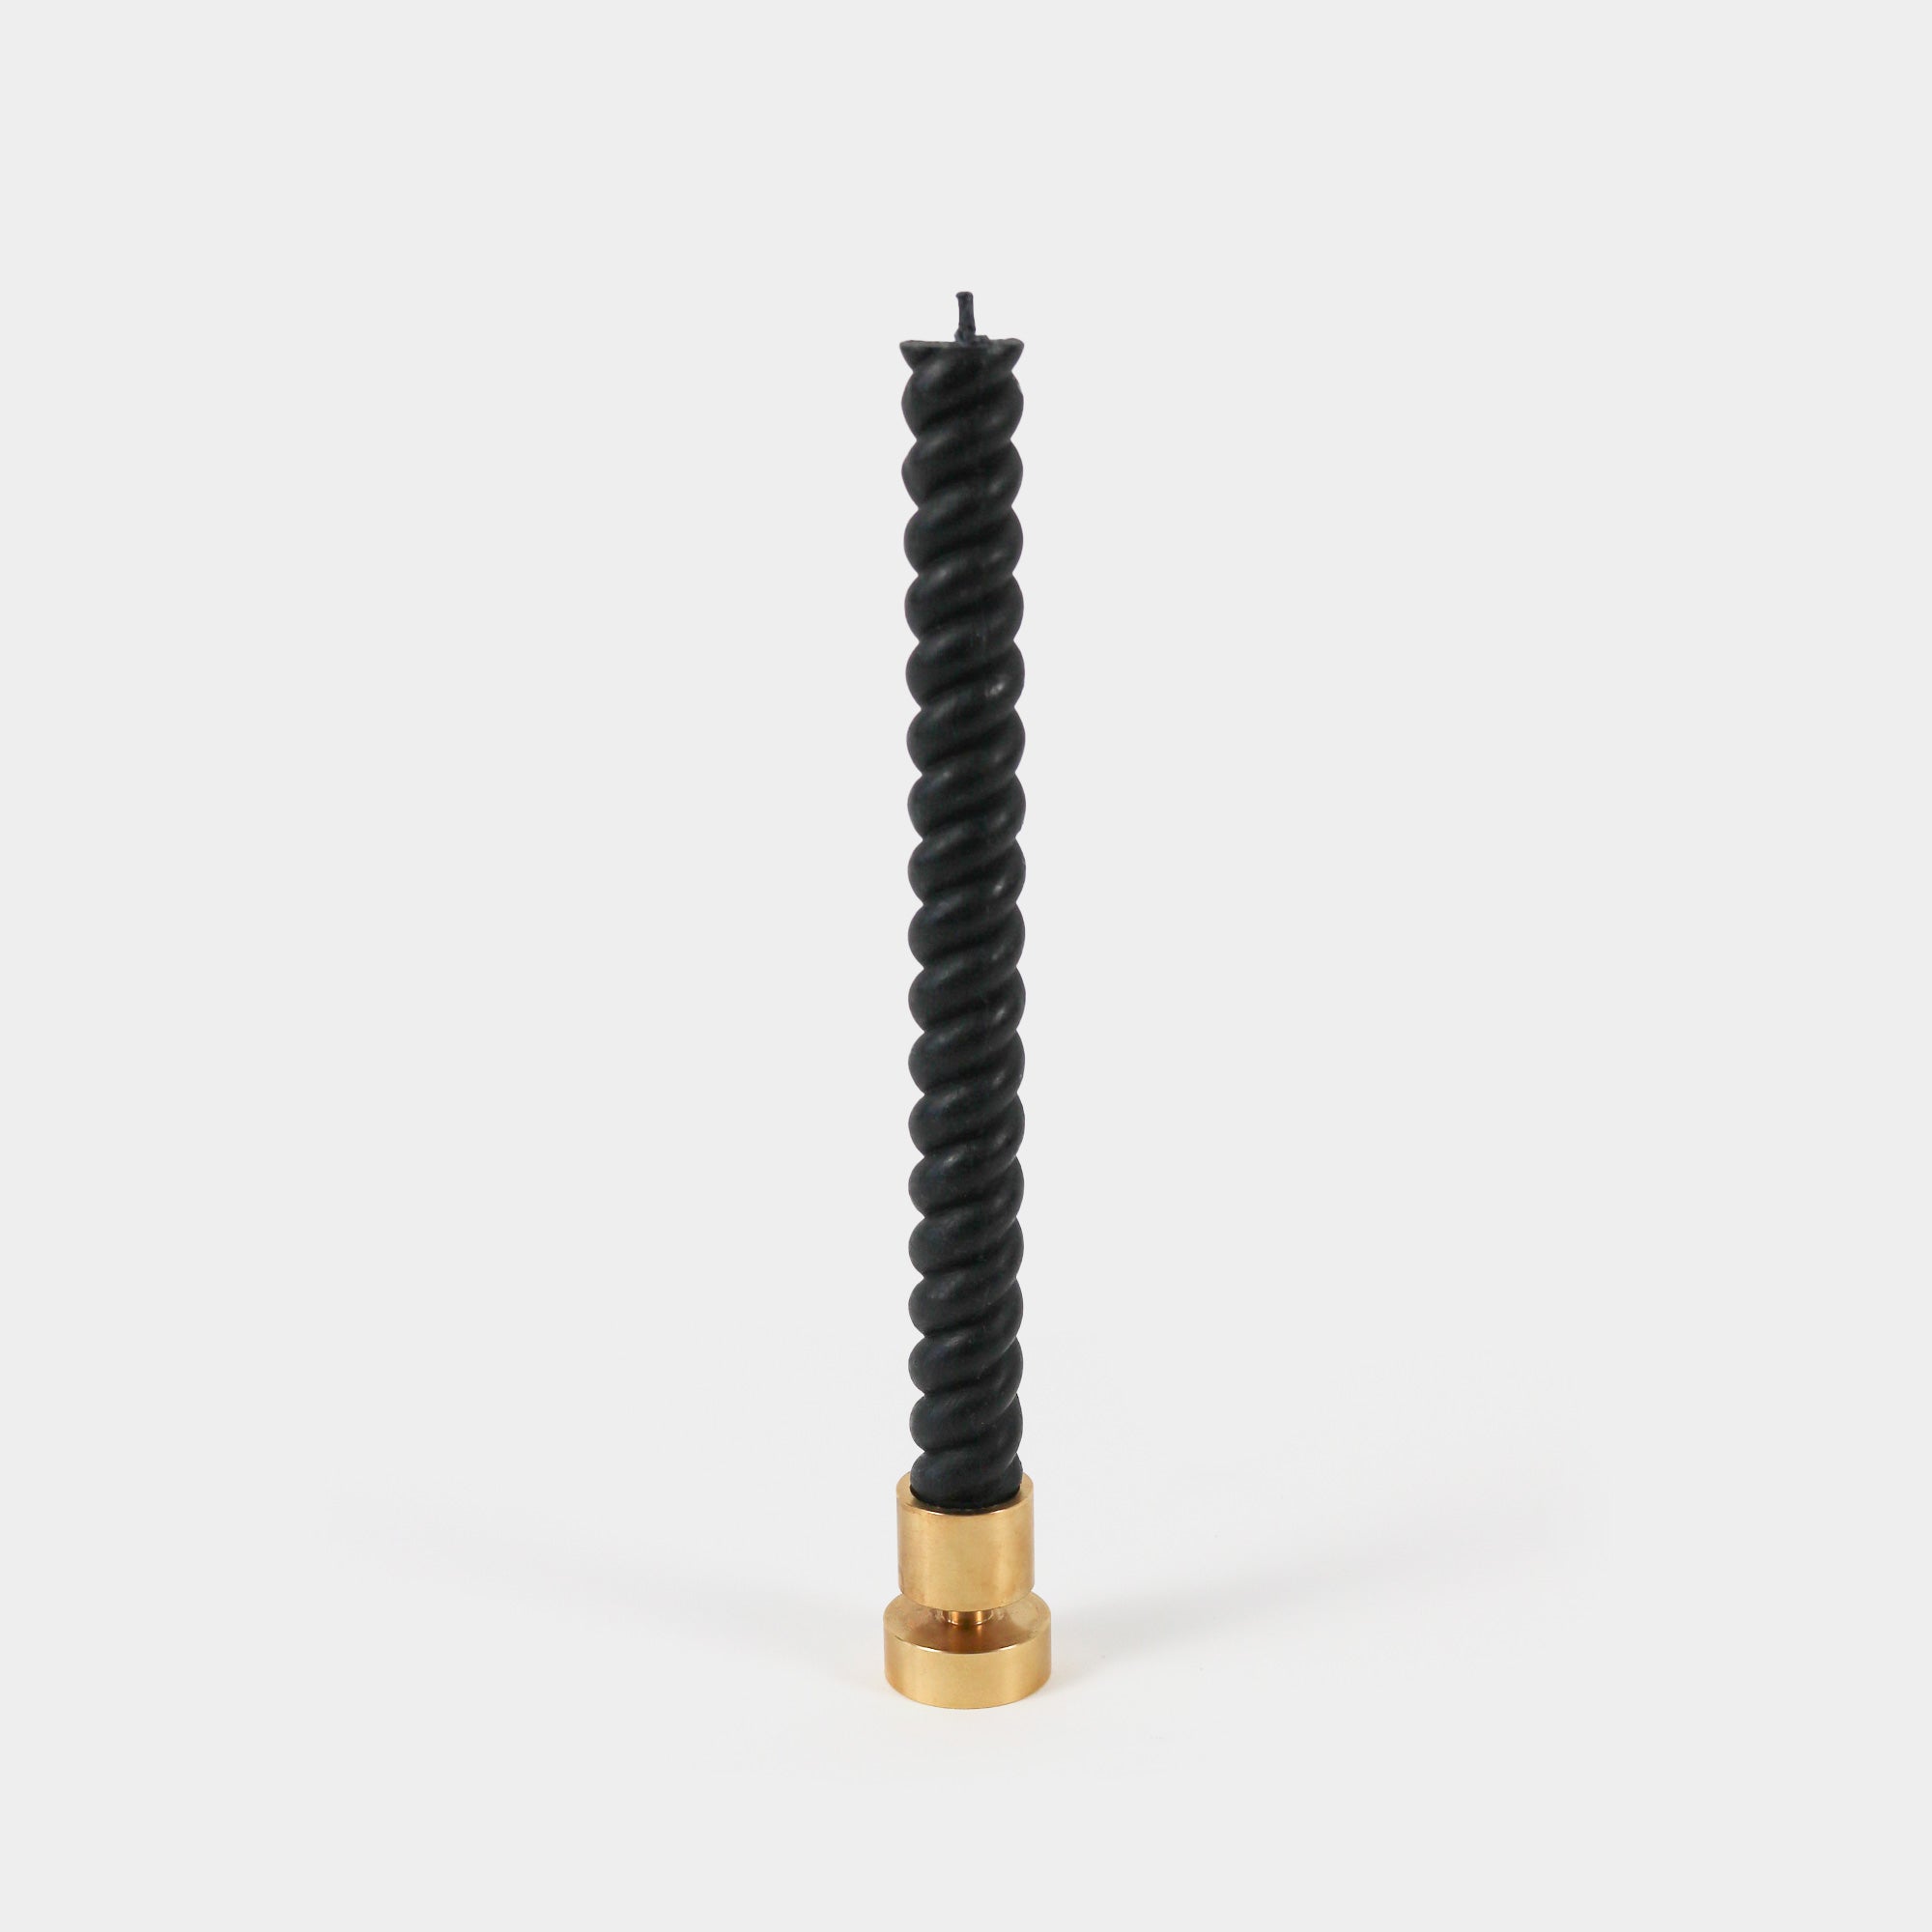 Spiral Beeswax Candles (2 pack) - Black